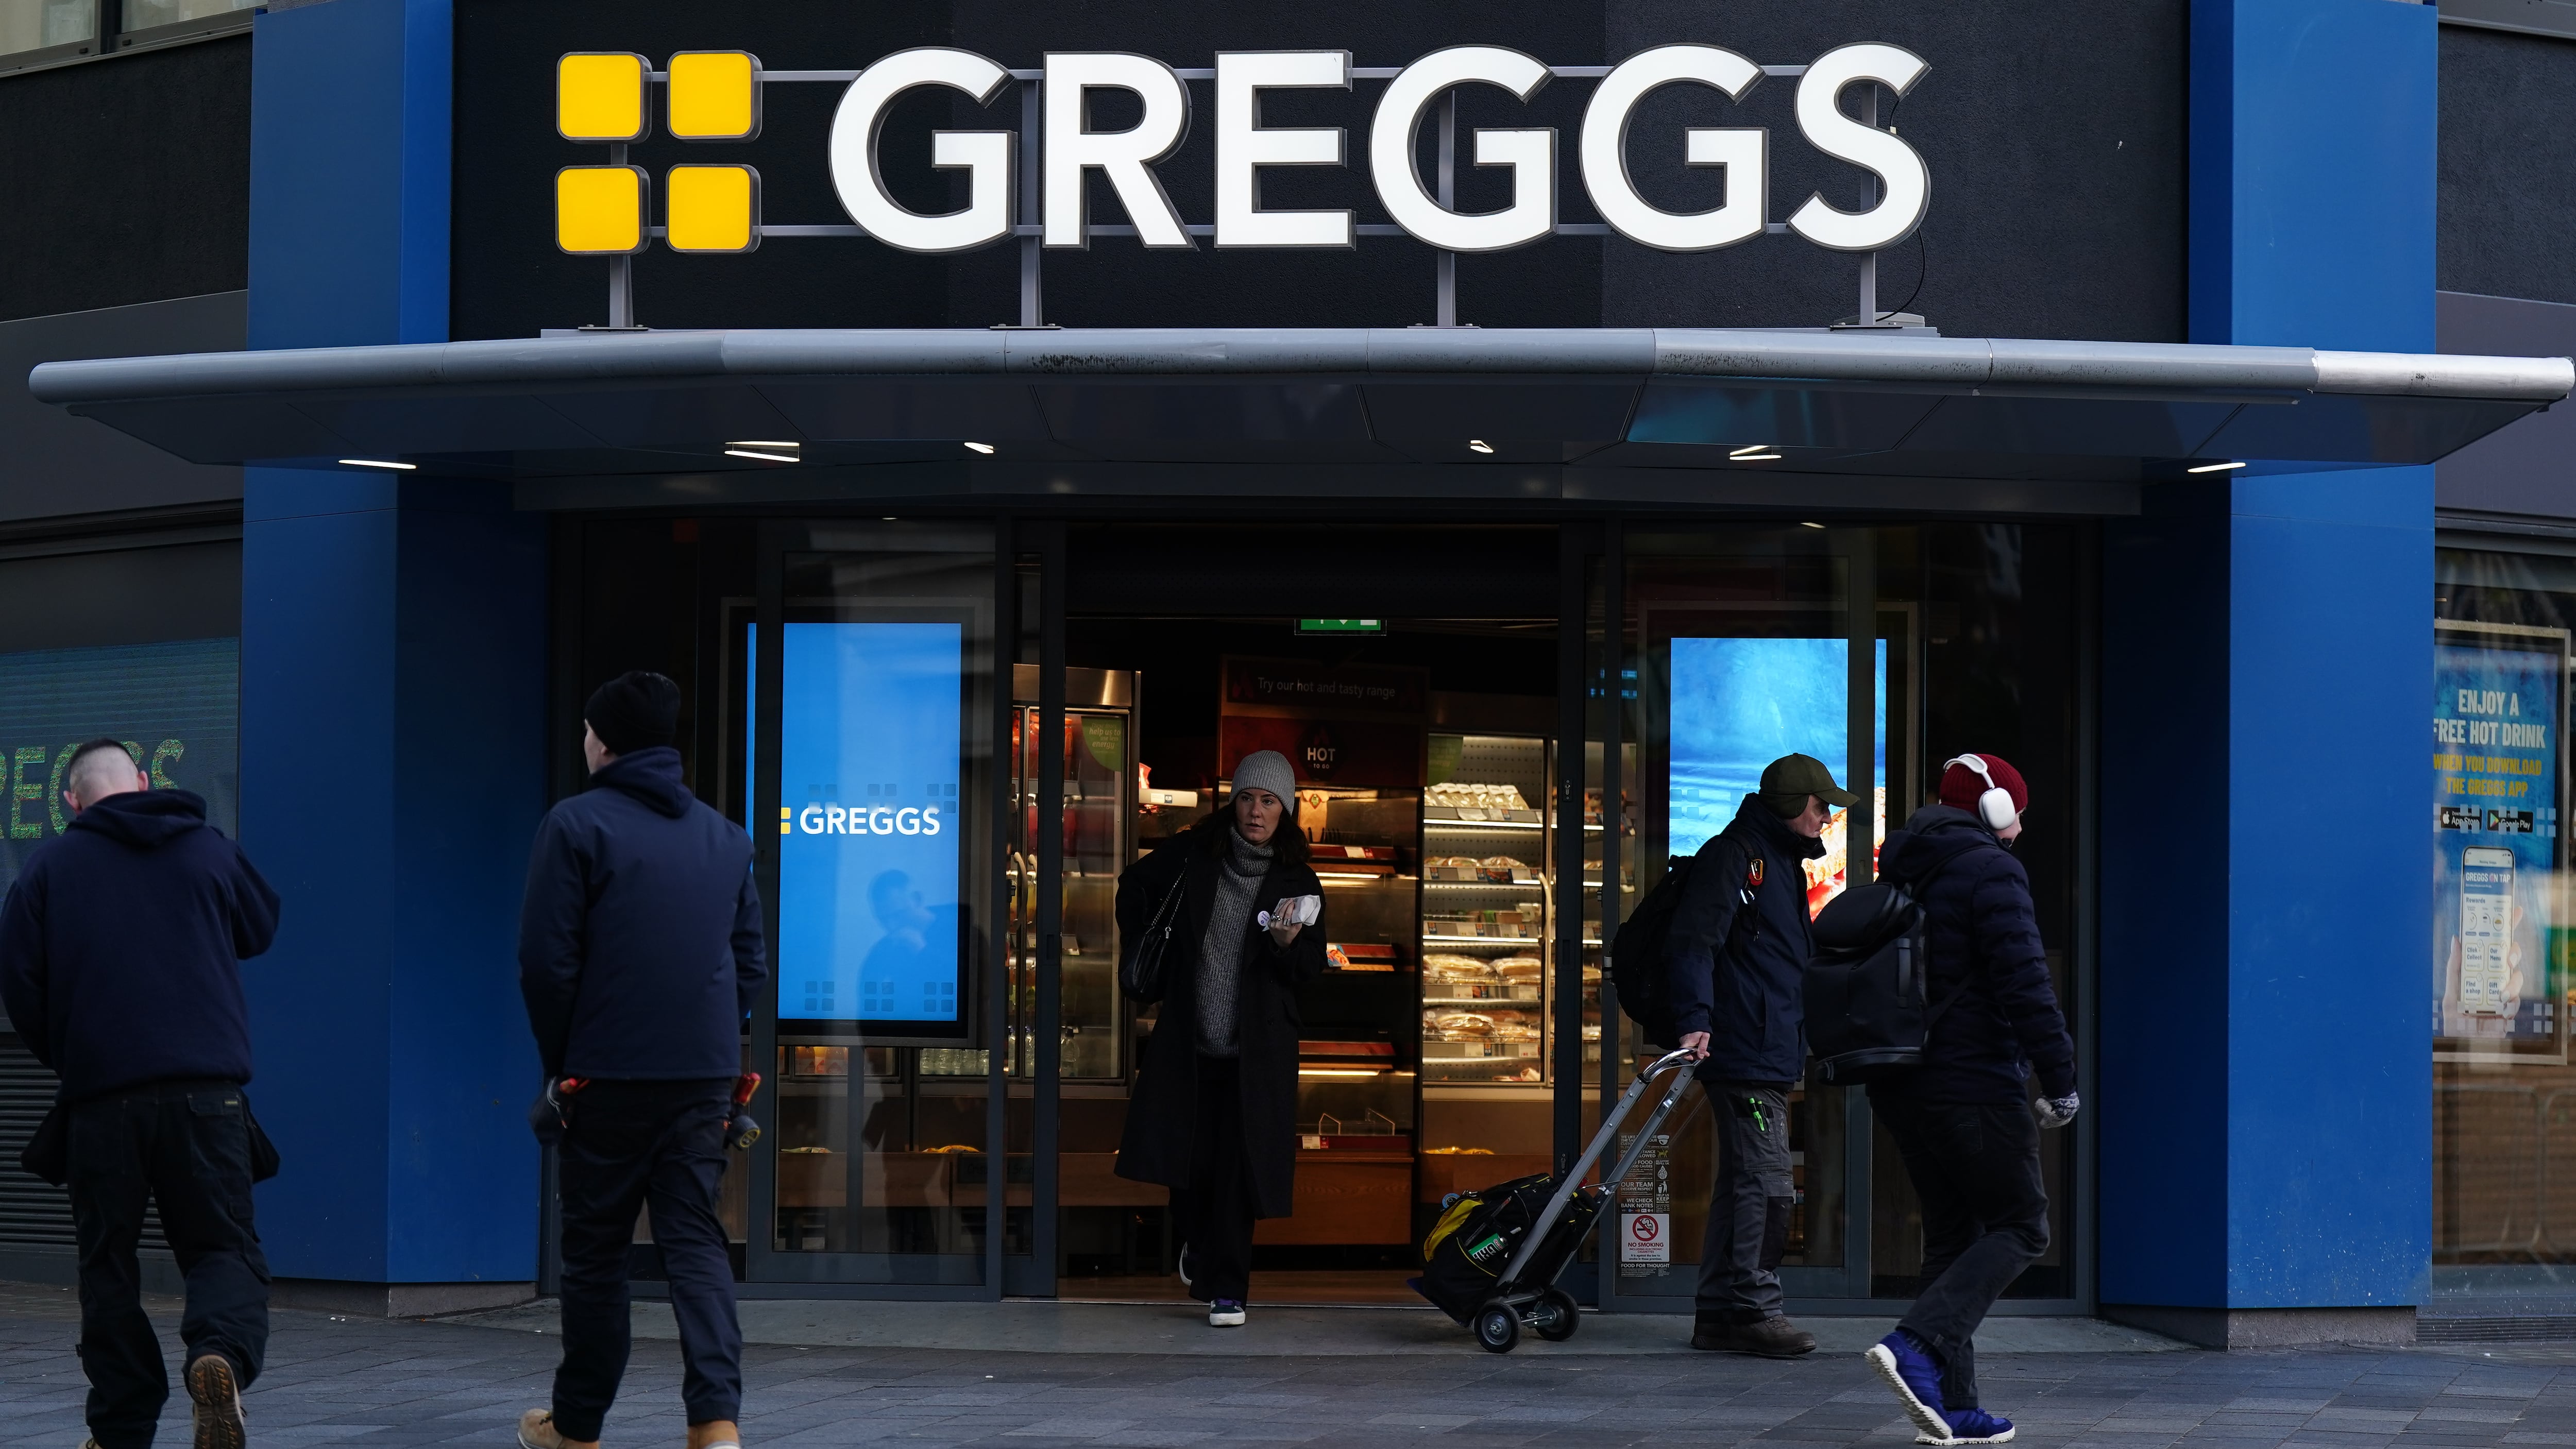 Greggs stores across the UK were forced to close on Wednesday morning after technical issues halted payments